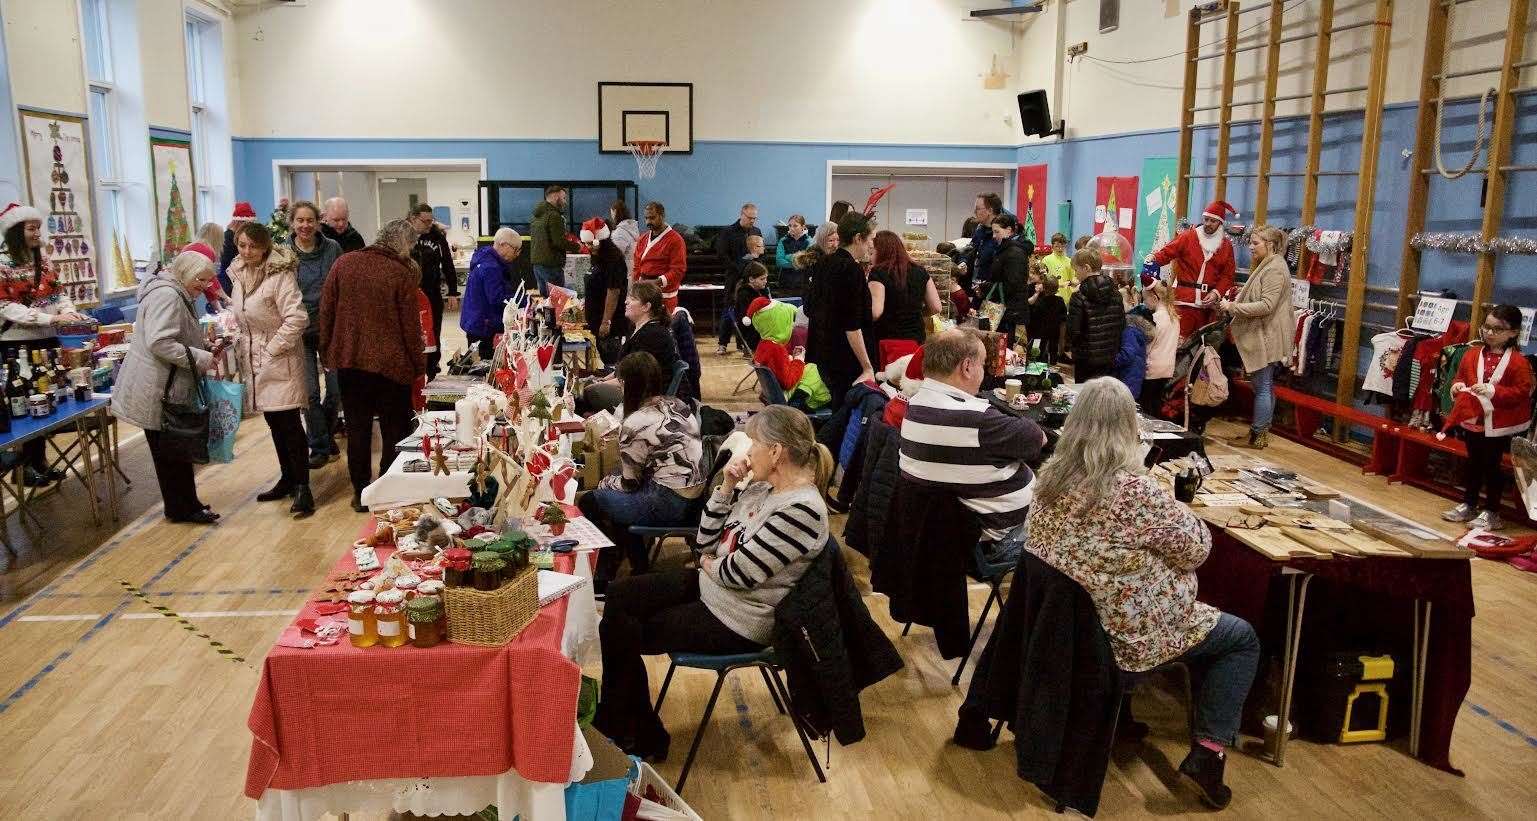 It was a busy day at Ellon Primary School's Christmas fair. Picture: Phil Harman